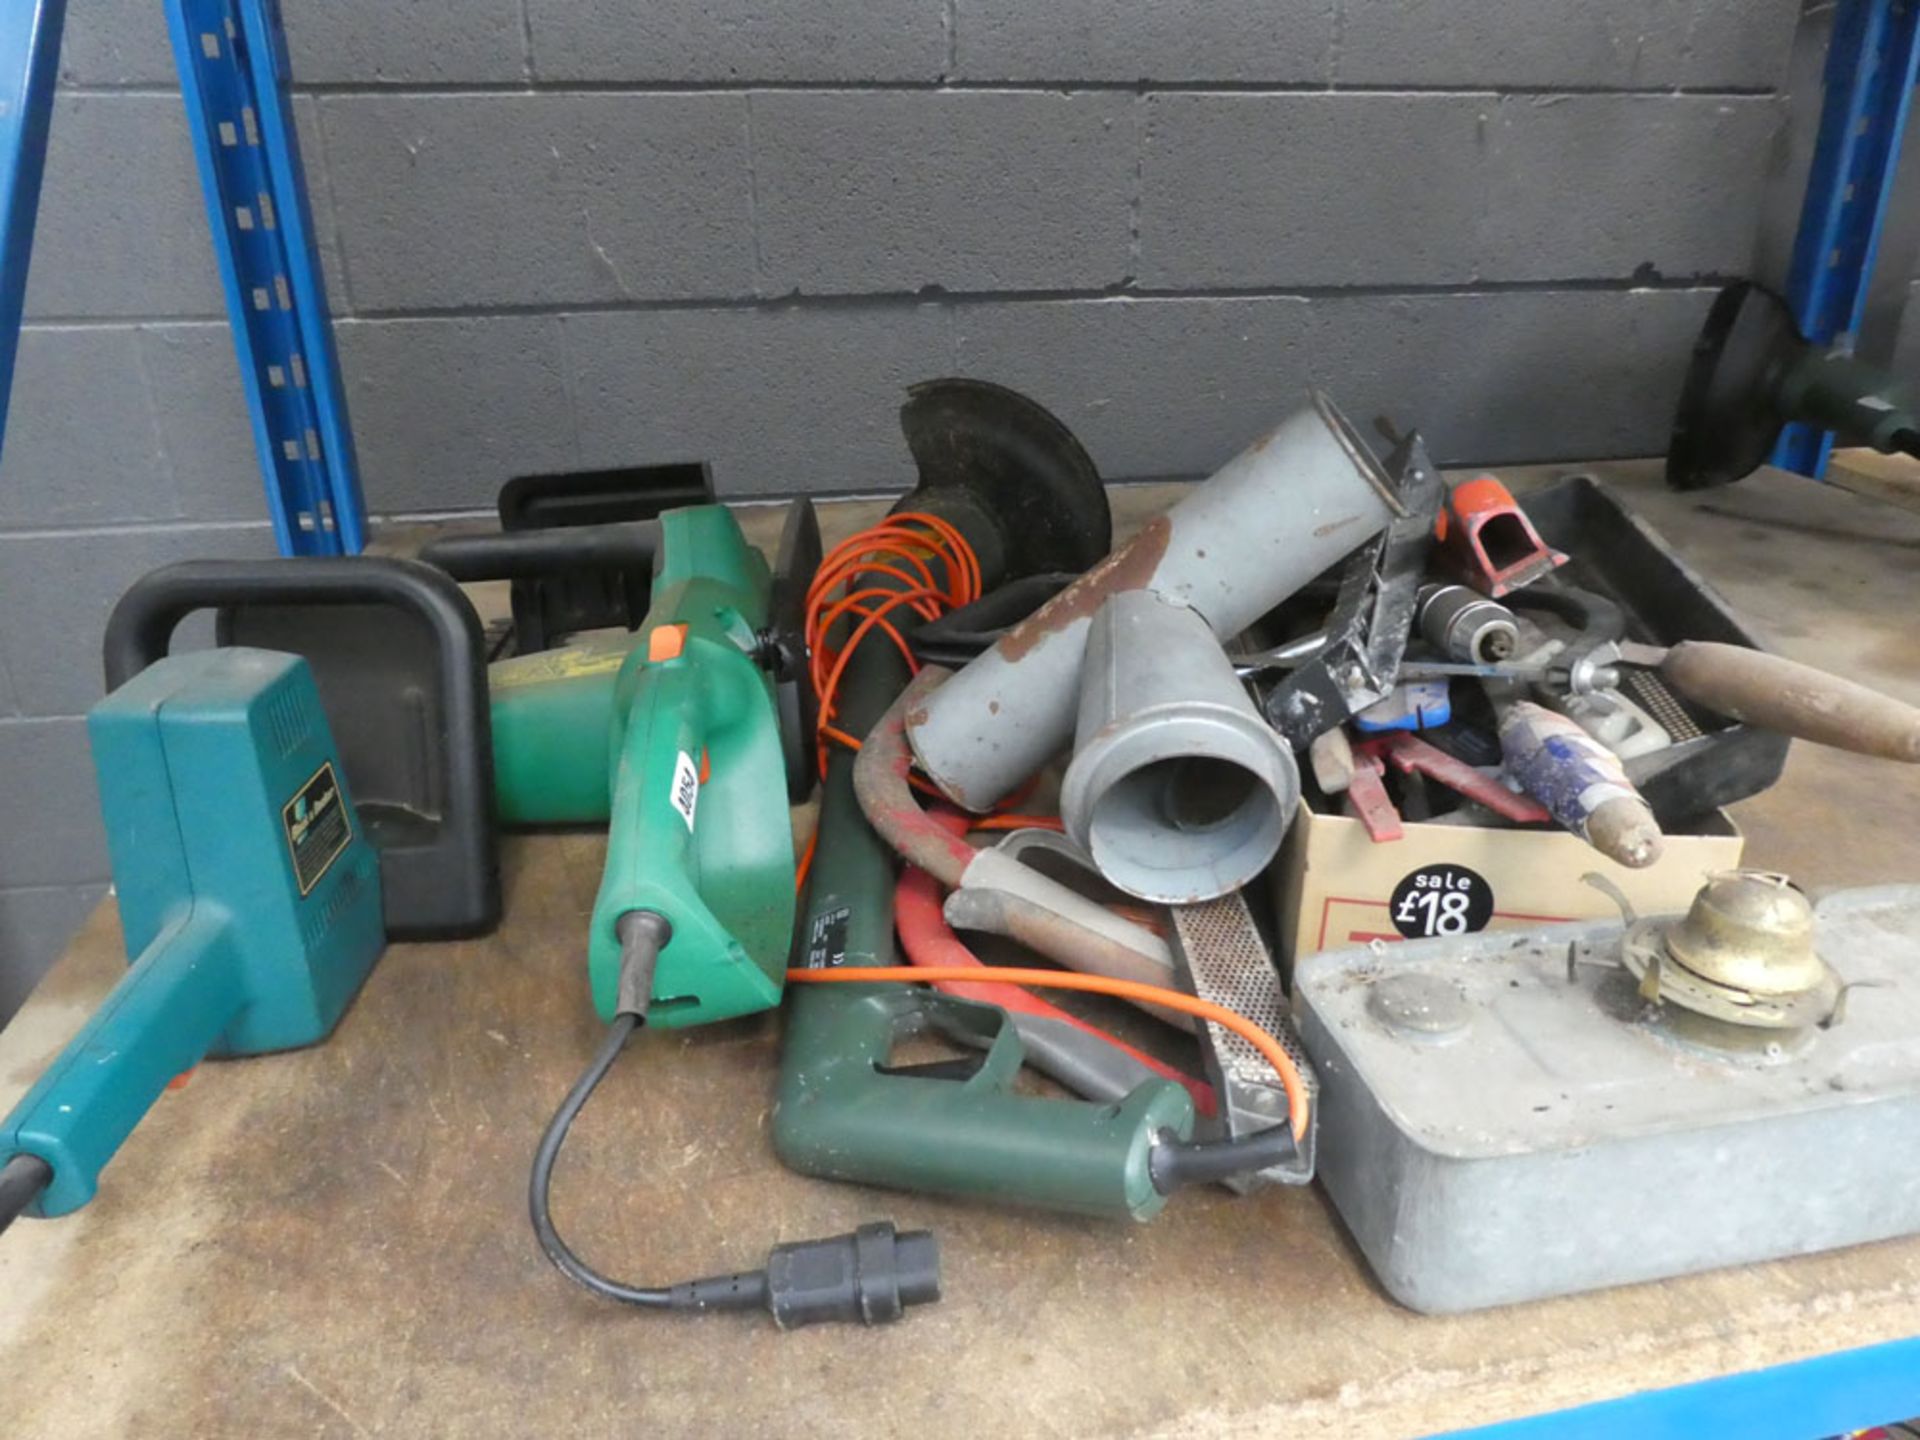 Black and Decker electric hedgecutter, chainsaw, strimmer, and various other handtools